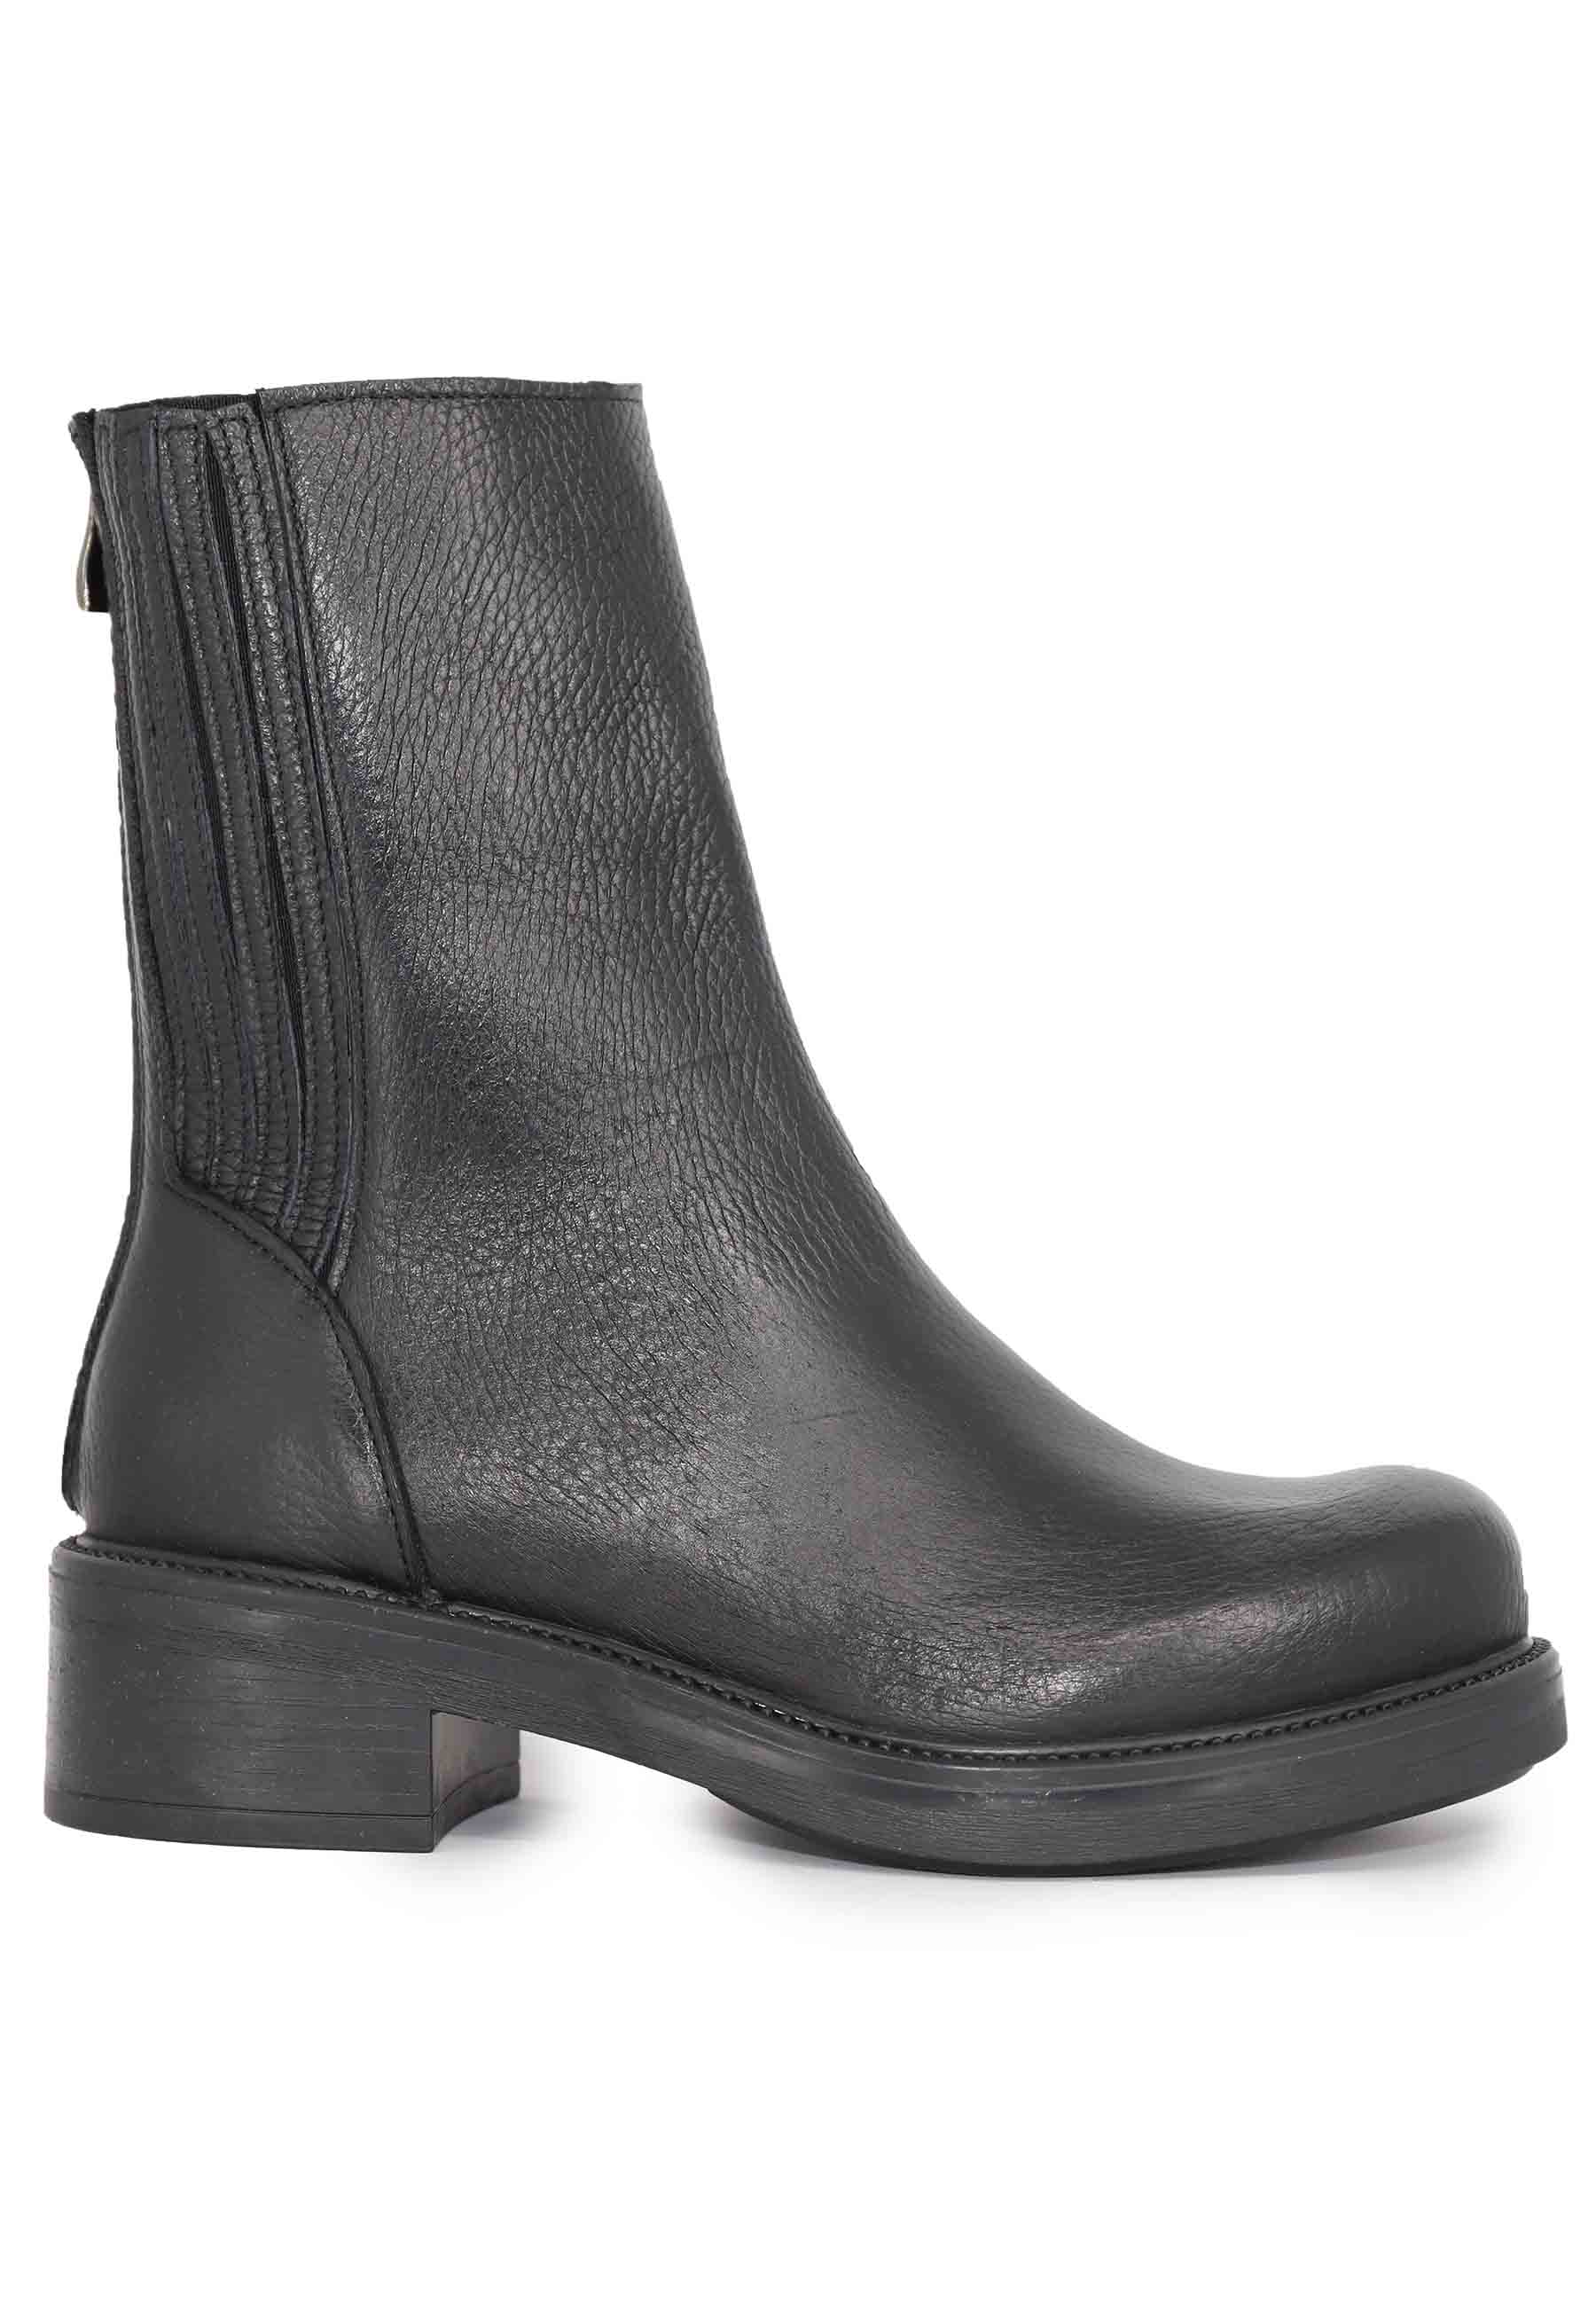 Women's black leather ankle boots with elastic and back zip